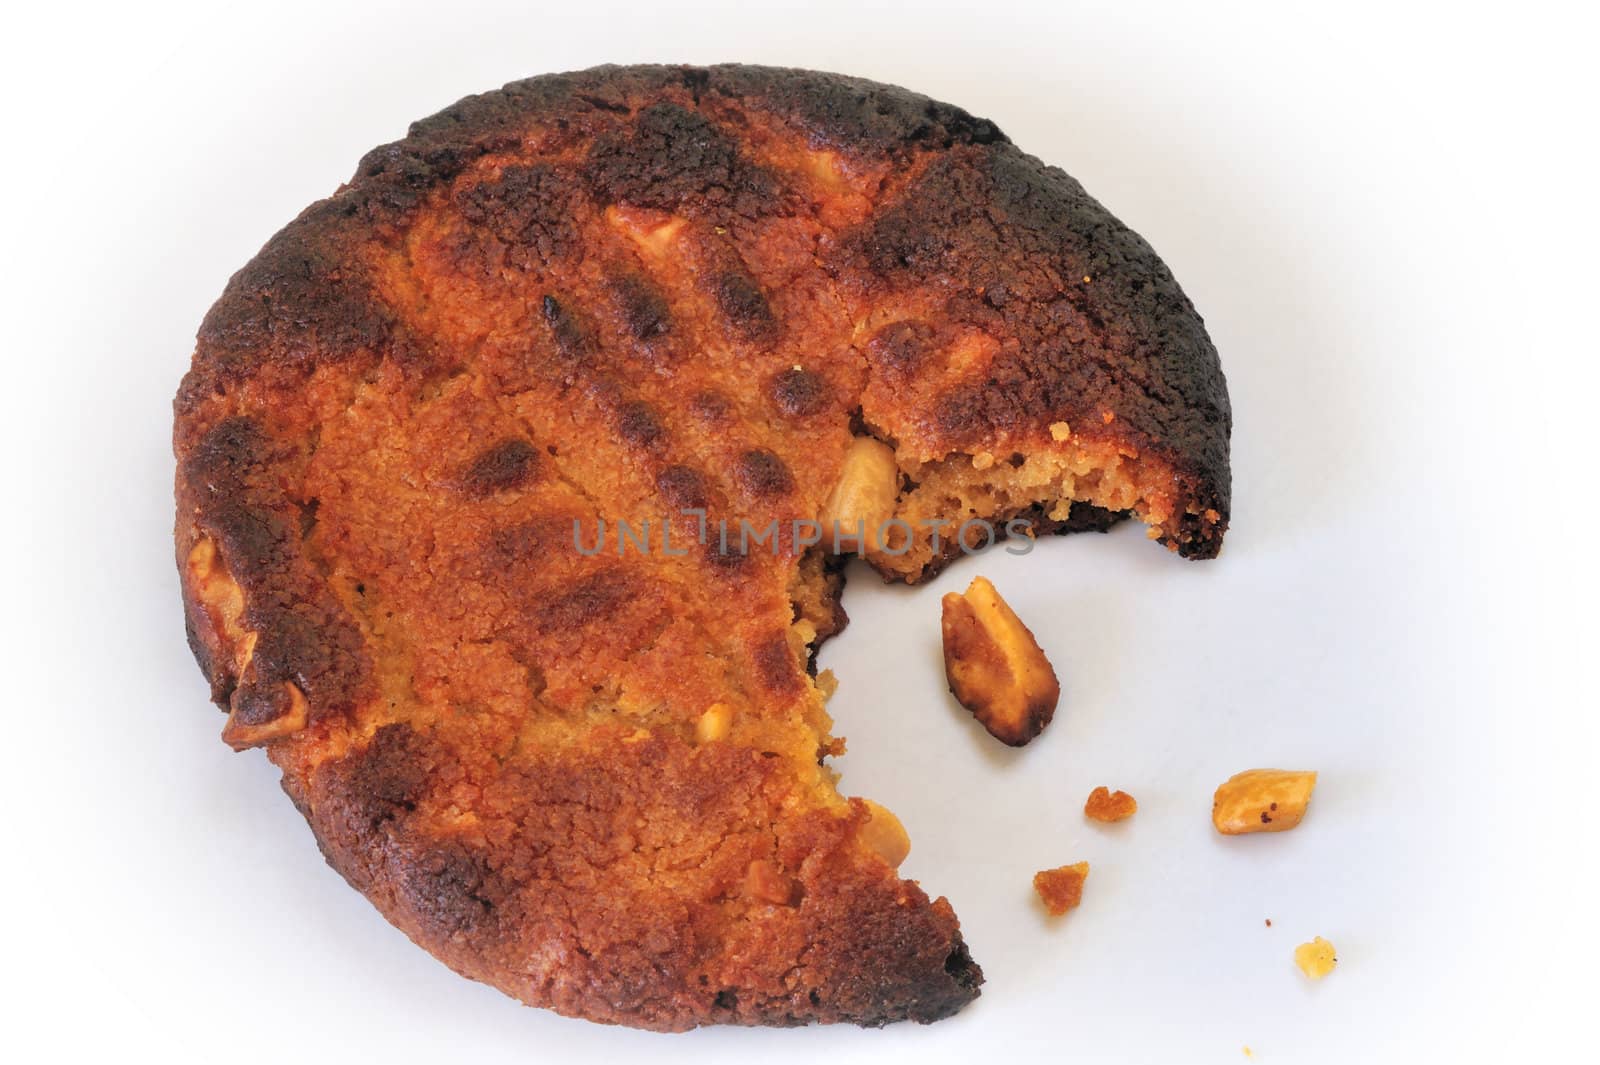 A burned, half-eaten biscuit, with a few crumbs, on a white background.